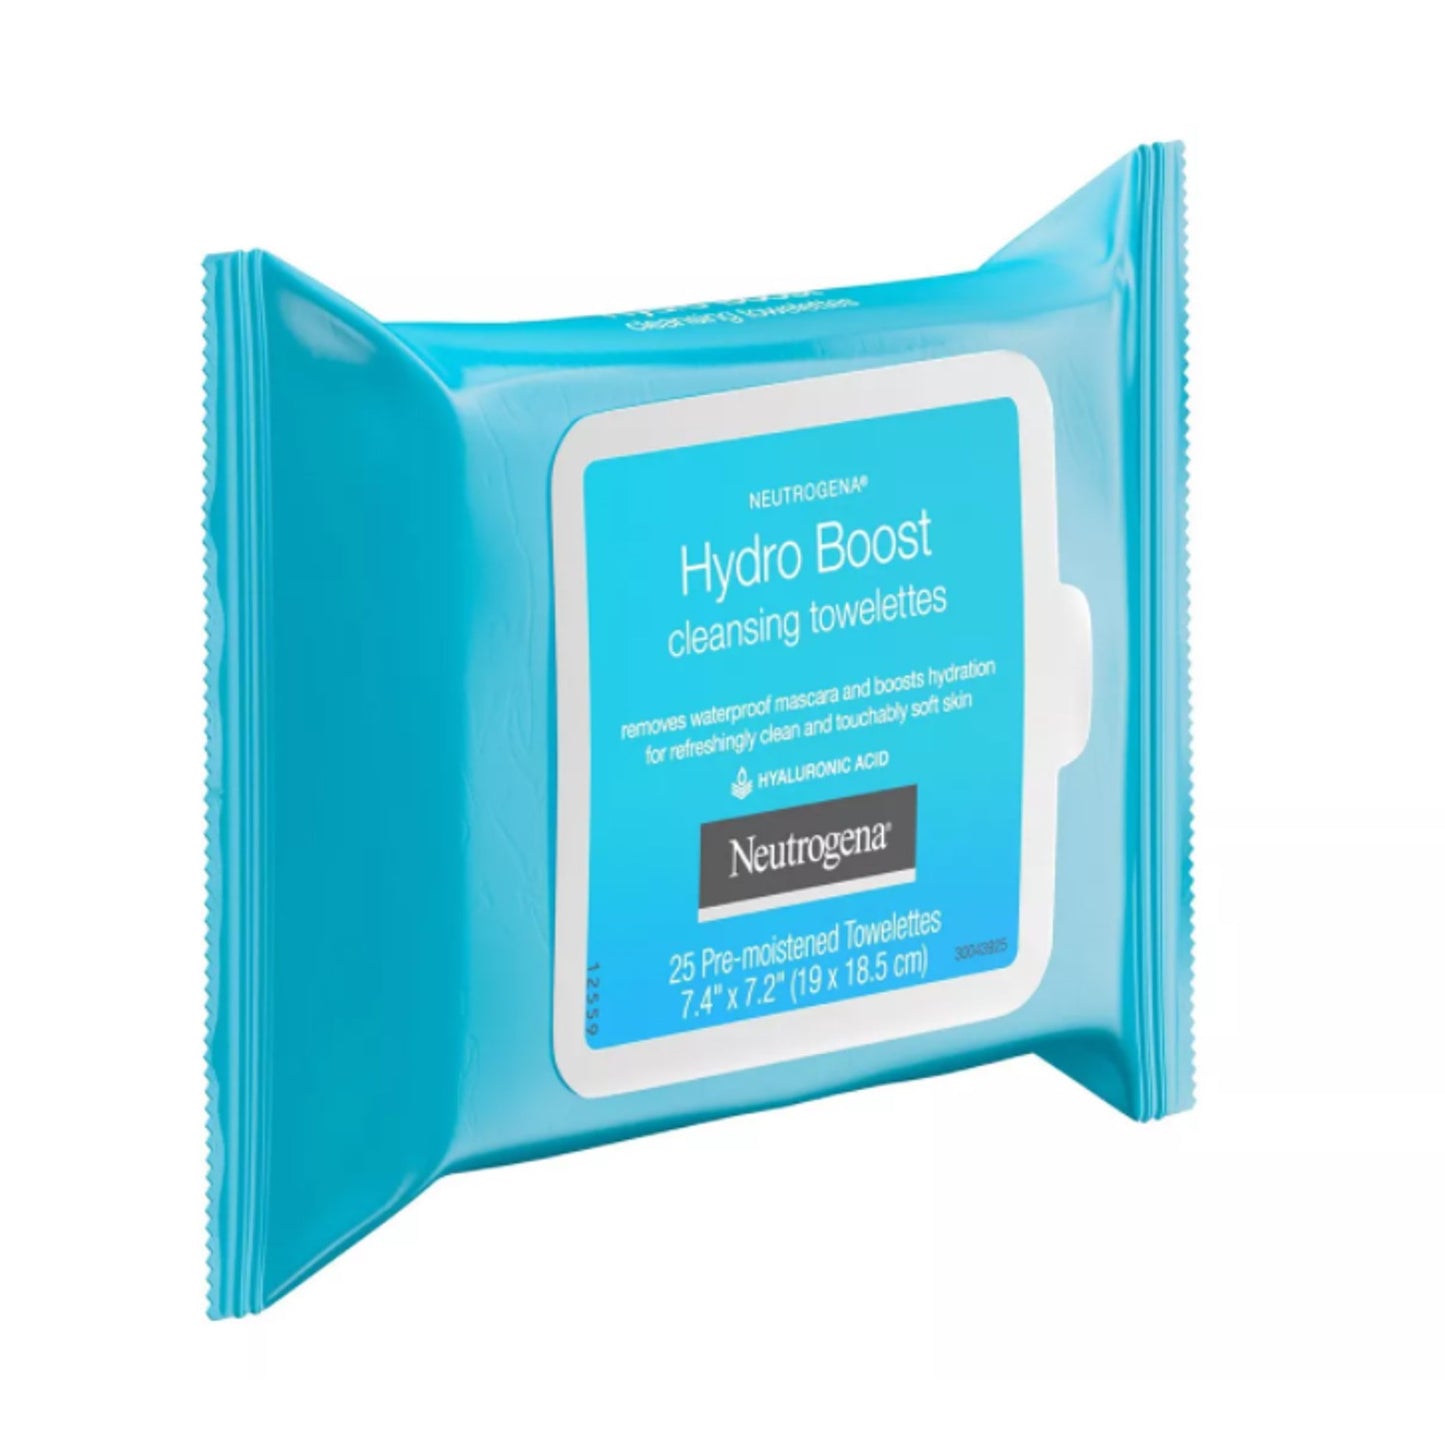 Neutrogena Hydro Boost Cleanser Facial Wipes 25 Count - 4 Pack